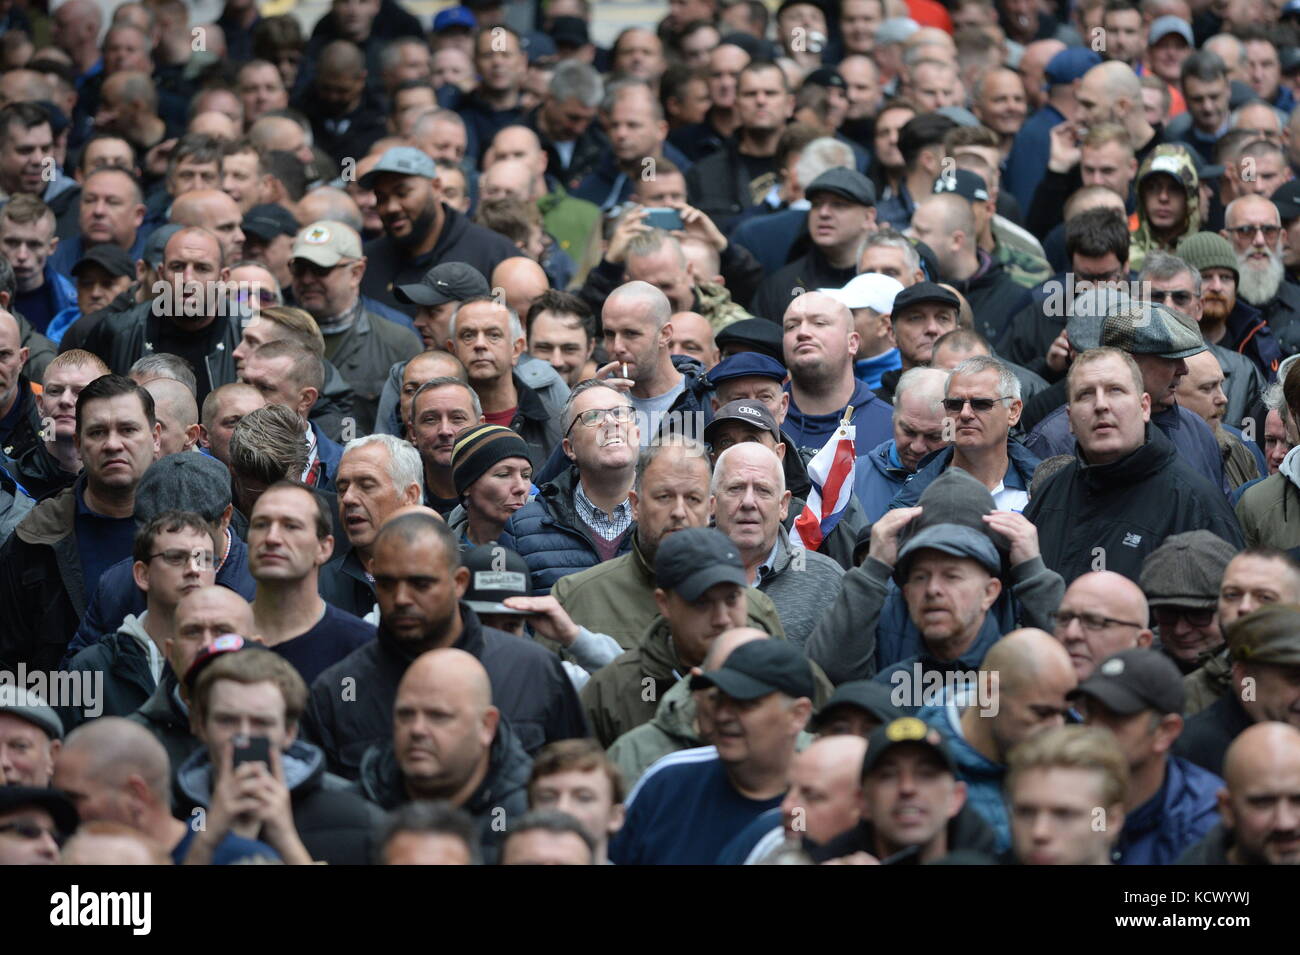 Members of the anti-extremist group Football Lads Alliance (FLA) and football fanbases from across the country gathered on London's Park Lane in demonstration against extremism, closing the five-lane carriageway to its usual throng of vehicles. Stock Photo